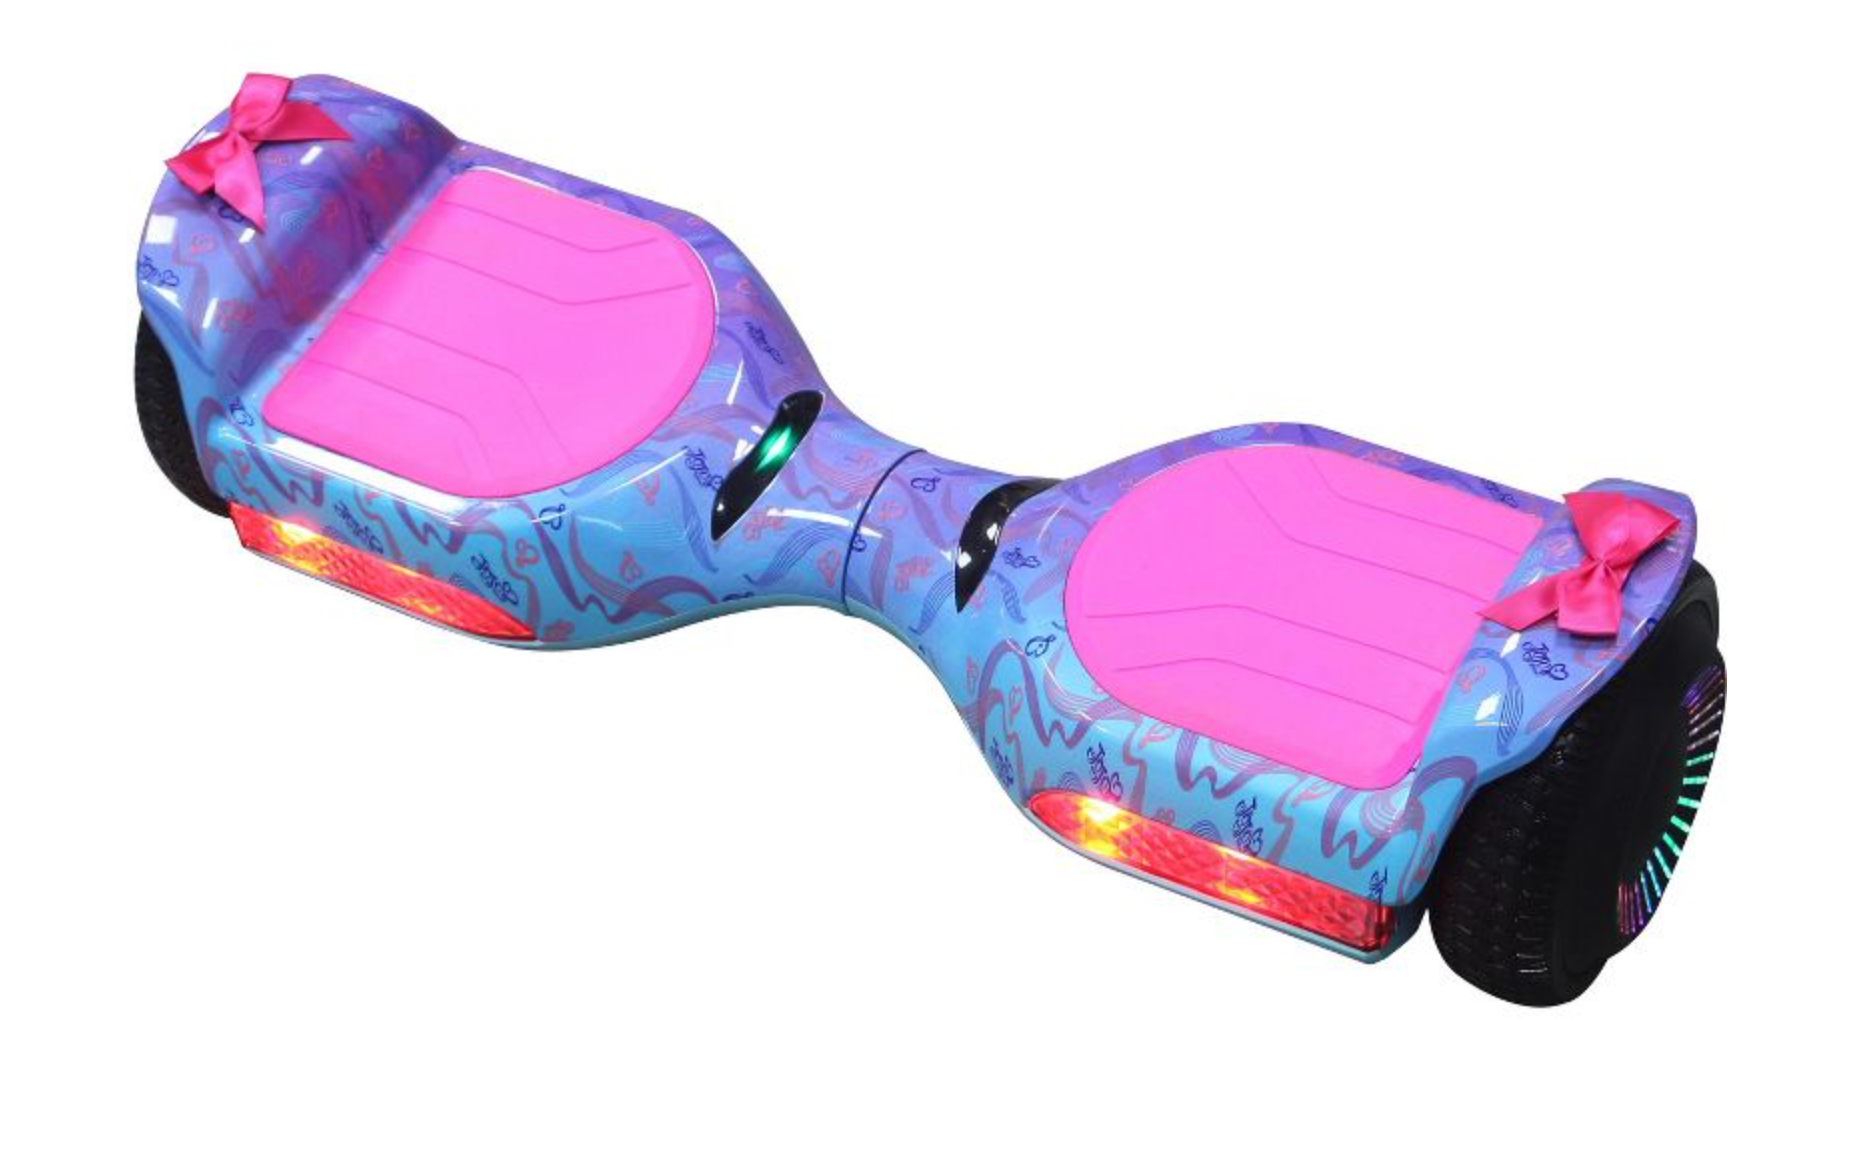 Pink, purple, and blue patterned hoverboard with pink bows on the side